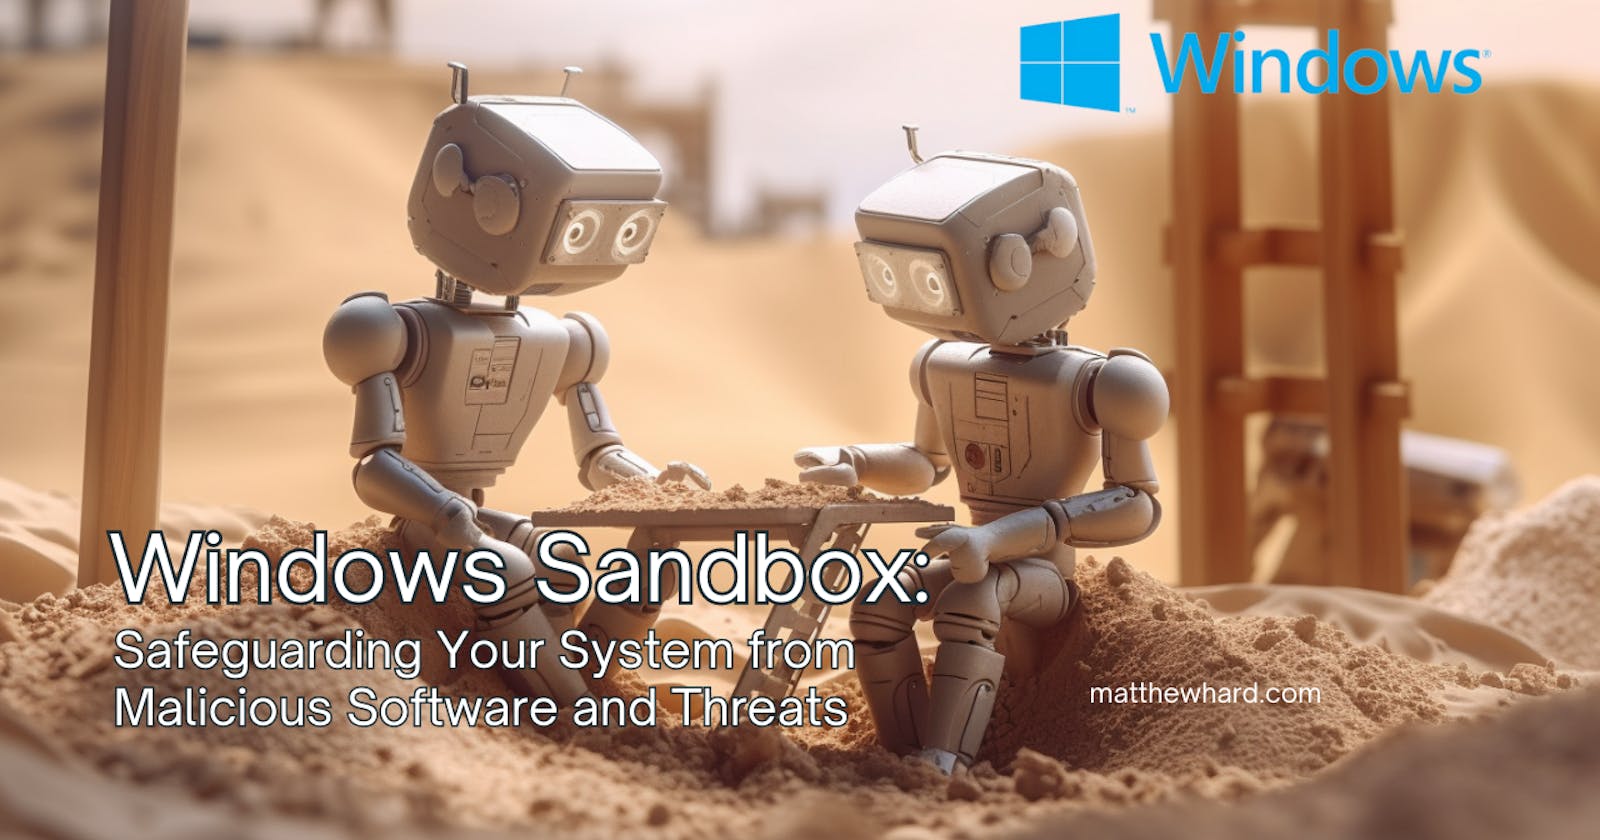 Windows Sandbox: Safeguarding Your System from Malicious Software and Threats